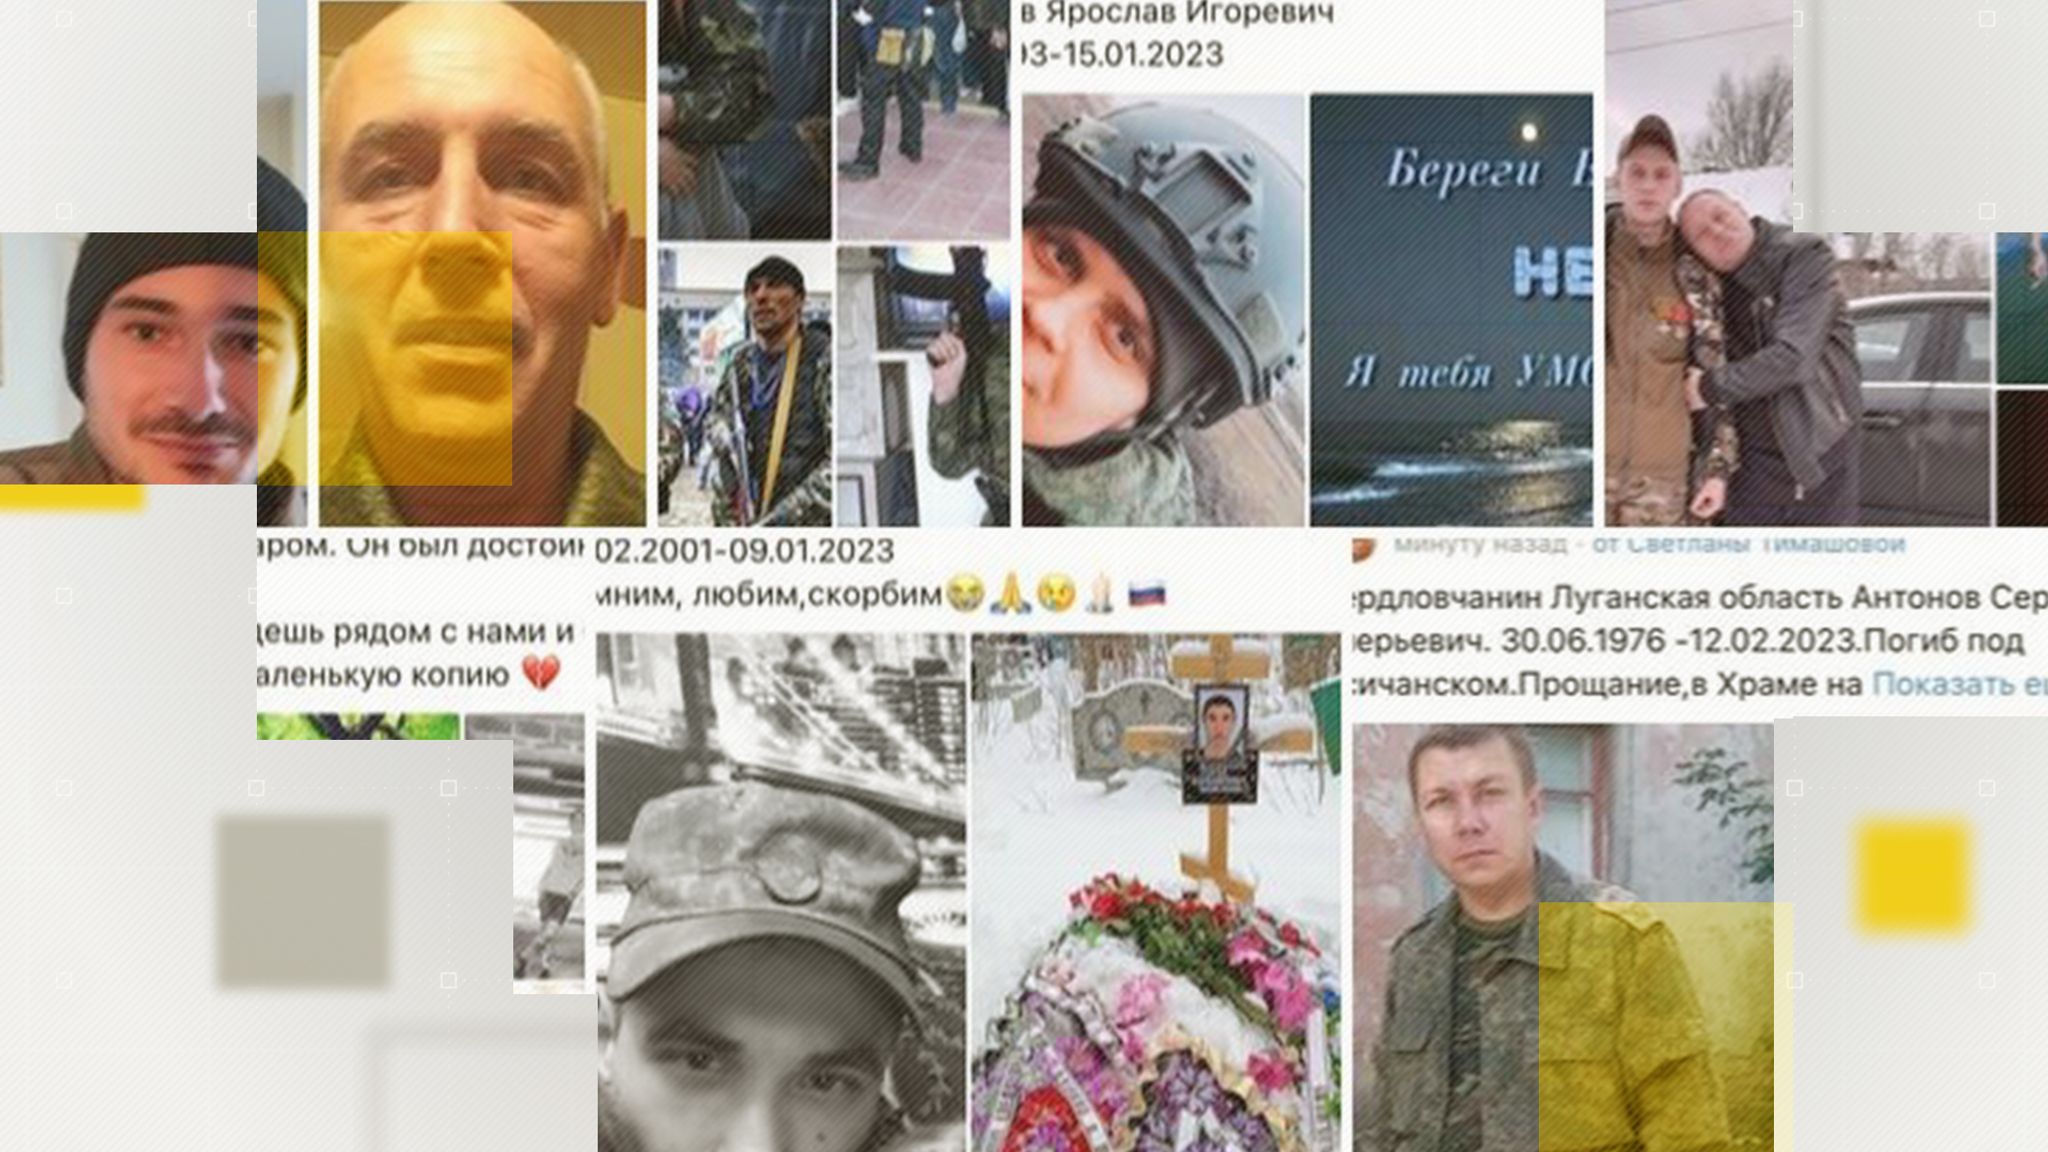 Criticism of Ukraine war spreads on Russian social media as loved